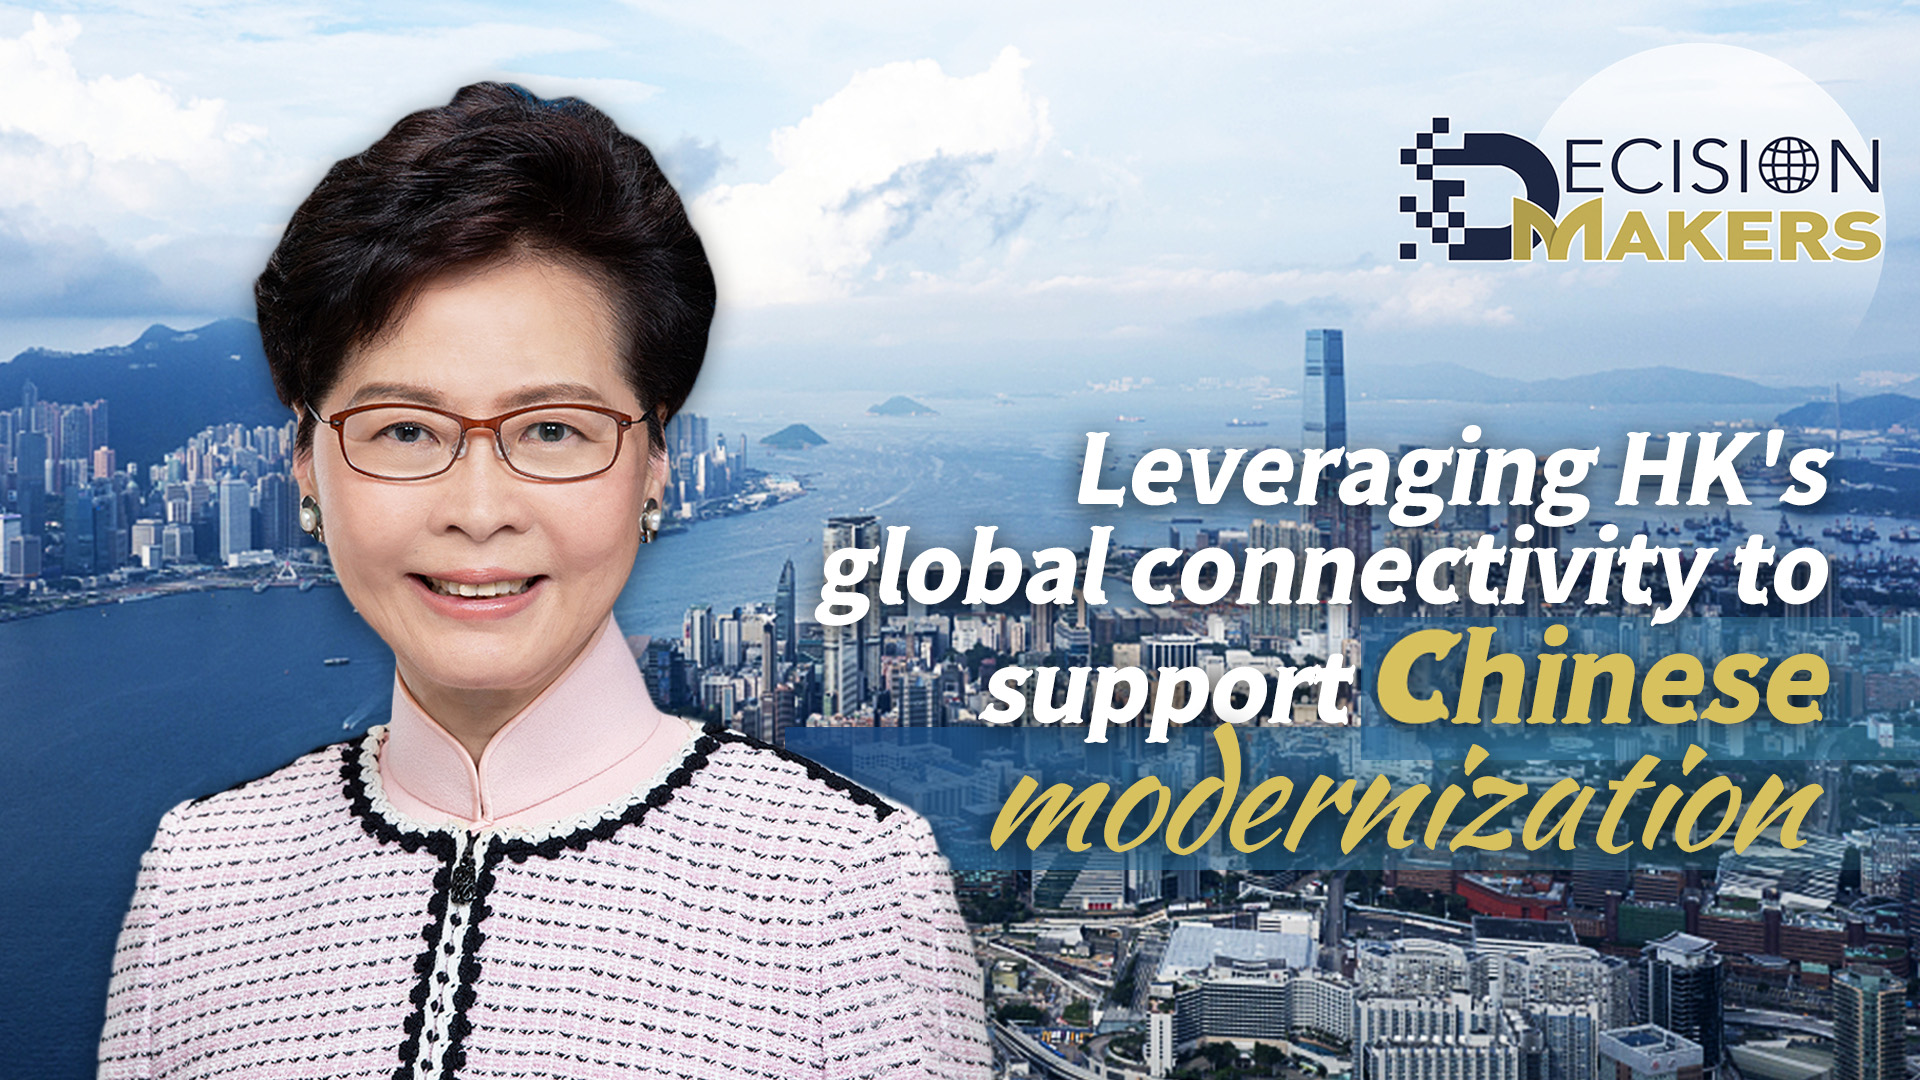 Leveraging HK's global connectivity to support Chinese modernization